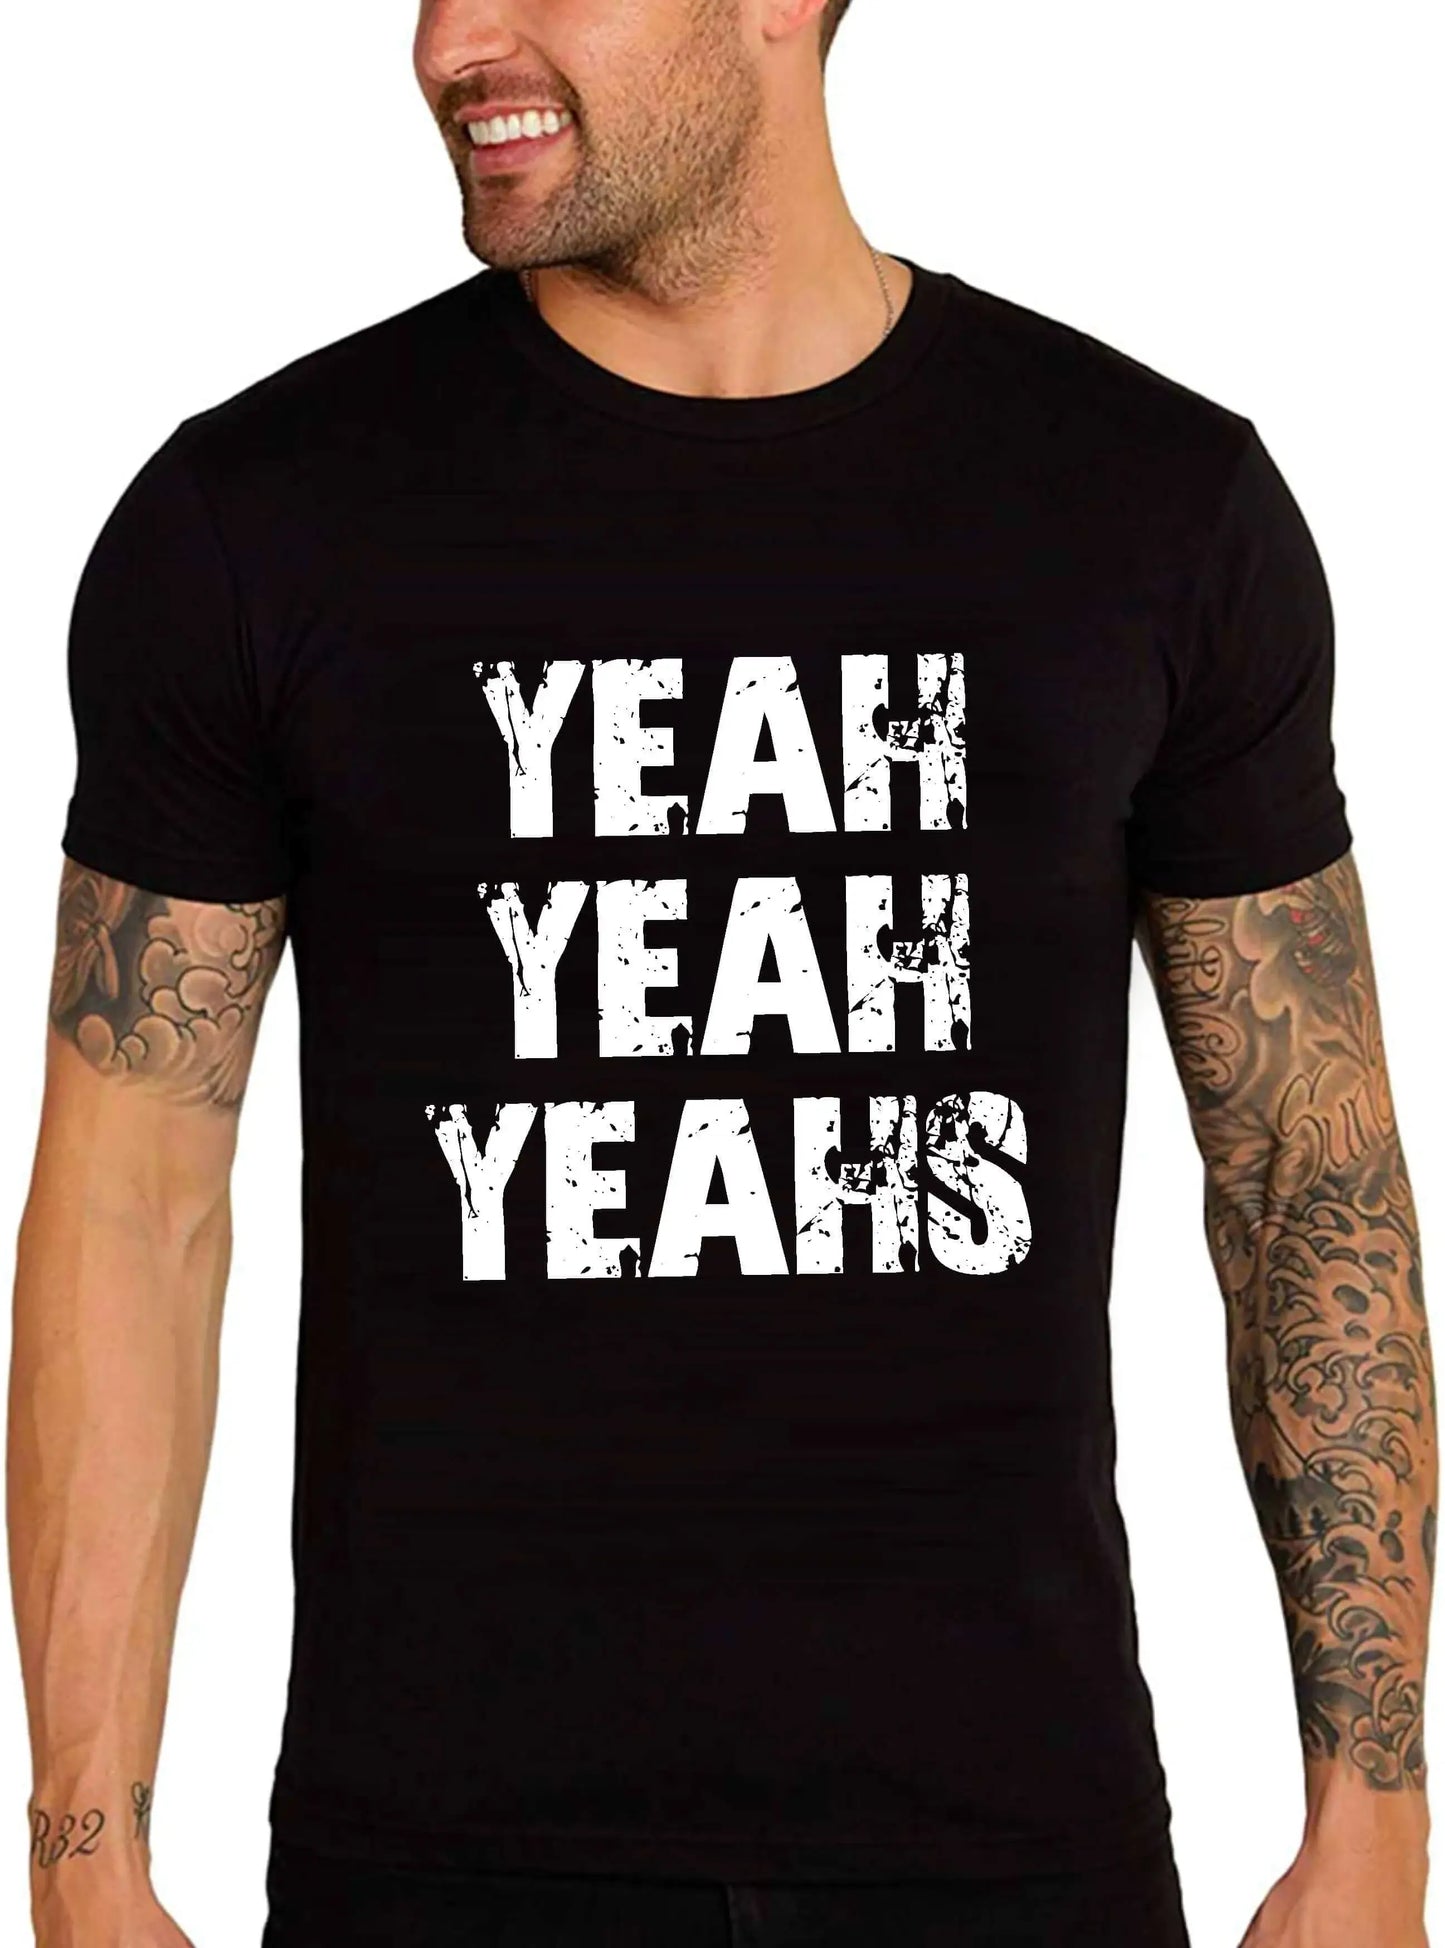 Men's Graphic T-Shirt Yeah Yeah Yeahs Eco-Friendly Limited Edition Short Sleeve Tee-Shirt Vintage Birthday Gift Novelty